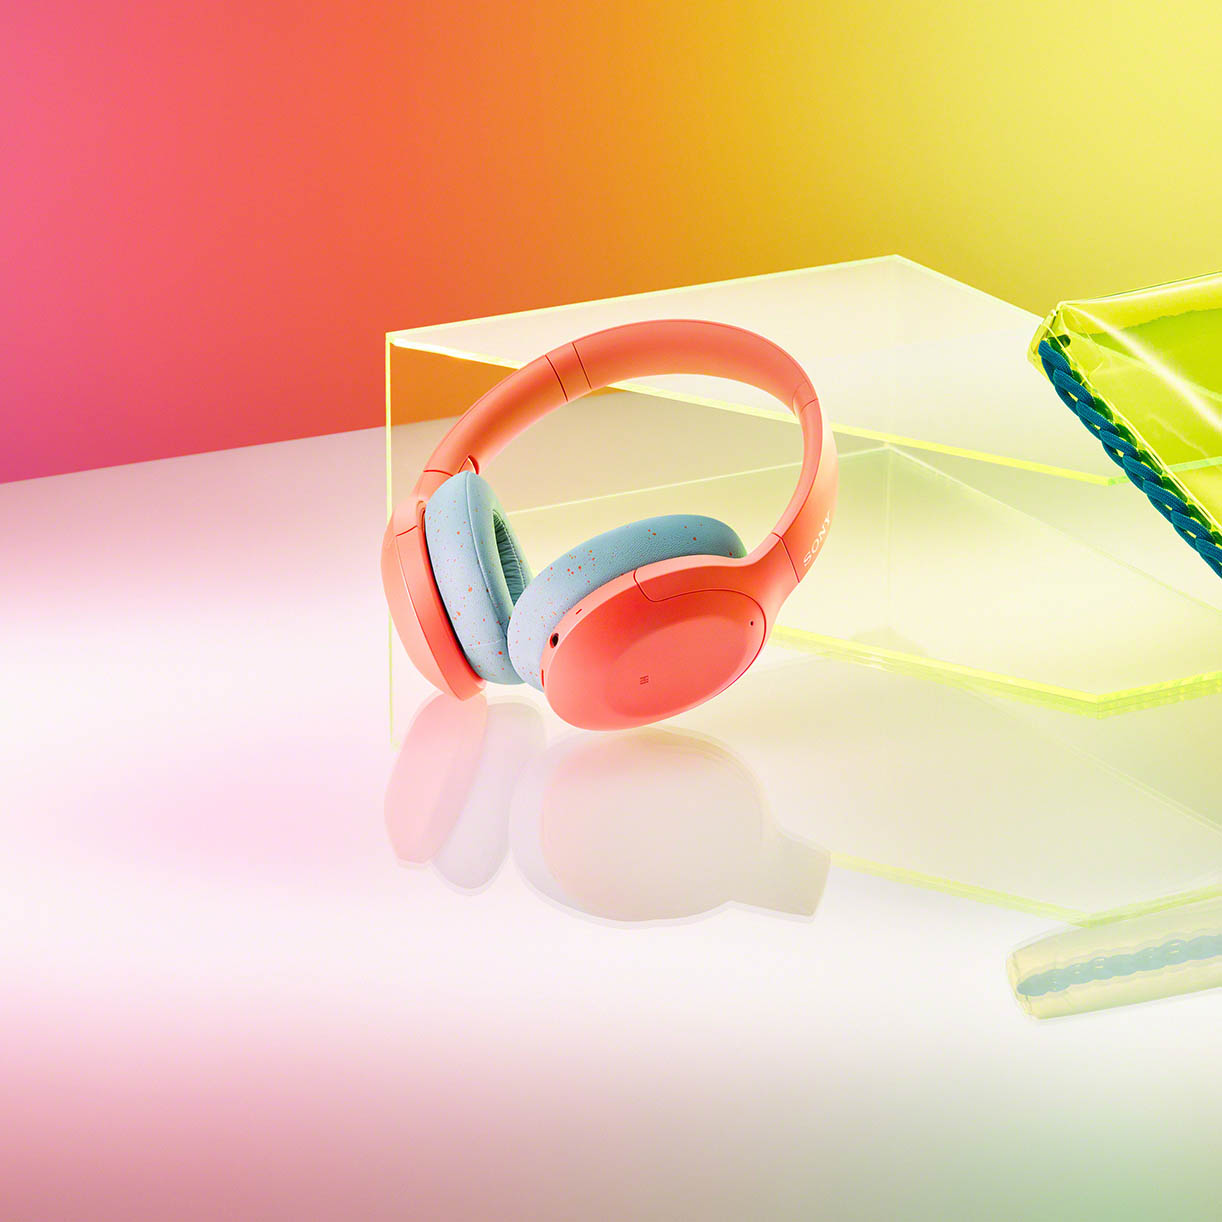 Sony Offers Colorful, Retro Headphones to Match Its Funky New